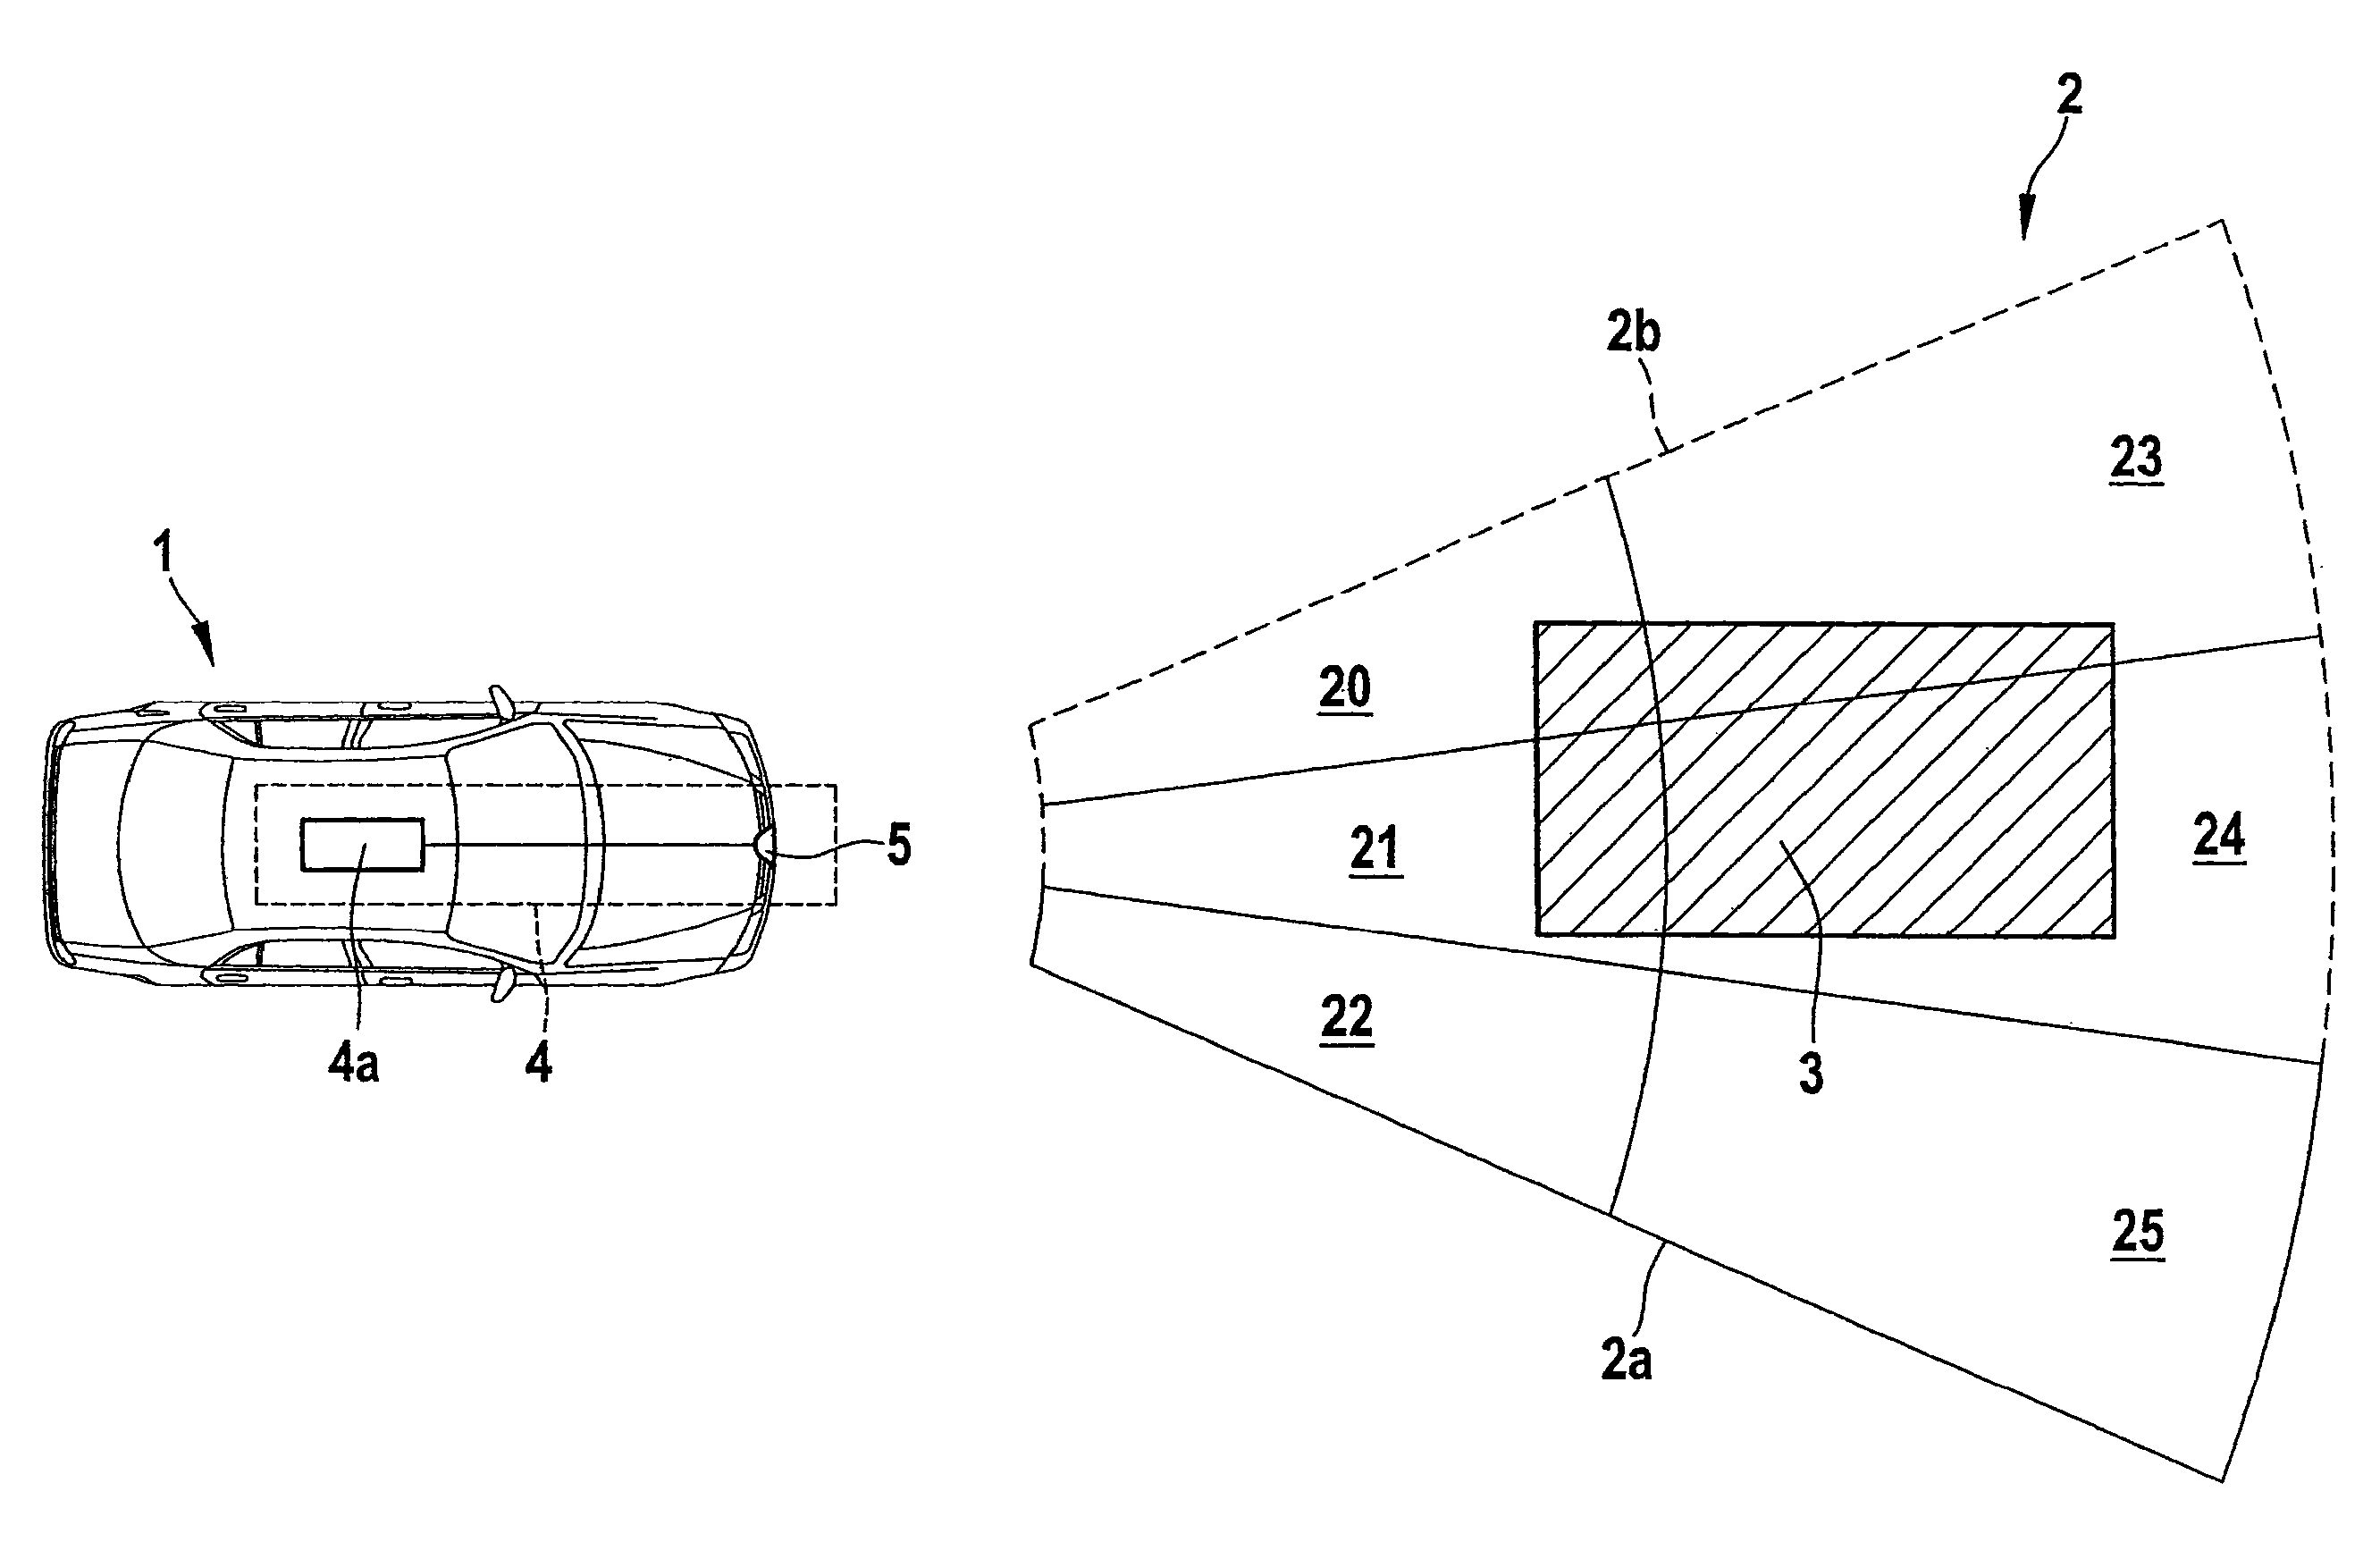 Method for determining free spaces in the vicinity of a motor vehicle, in particular in the vicinity relevant to the vehicle operation